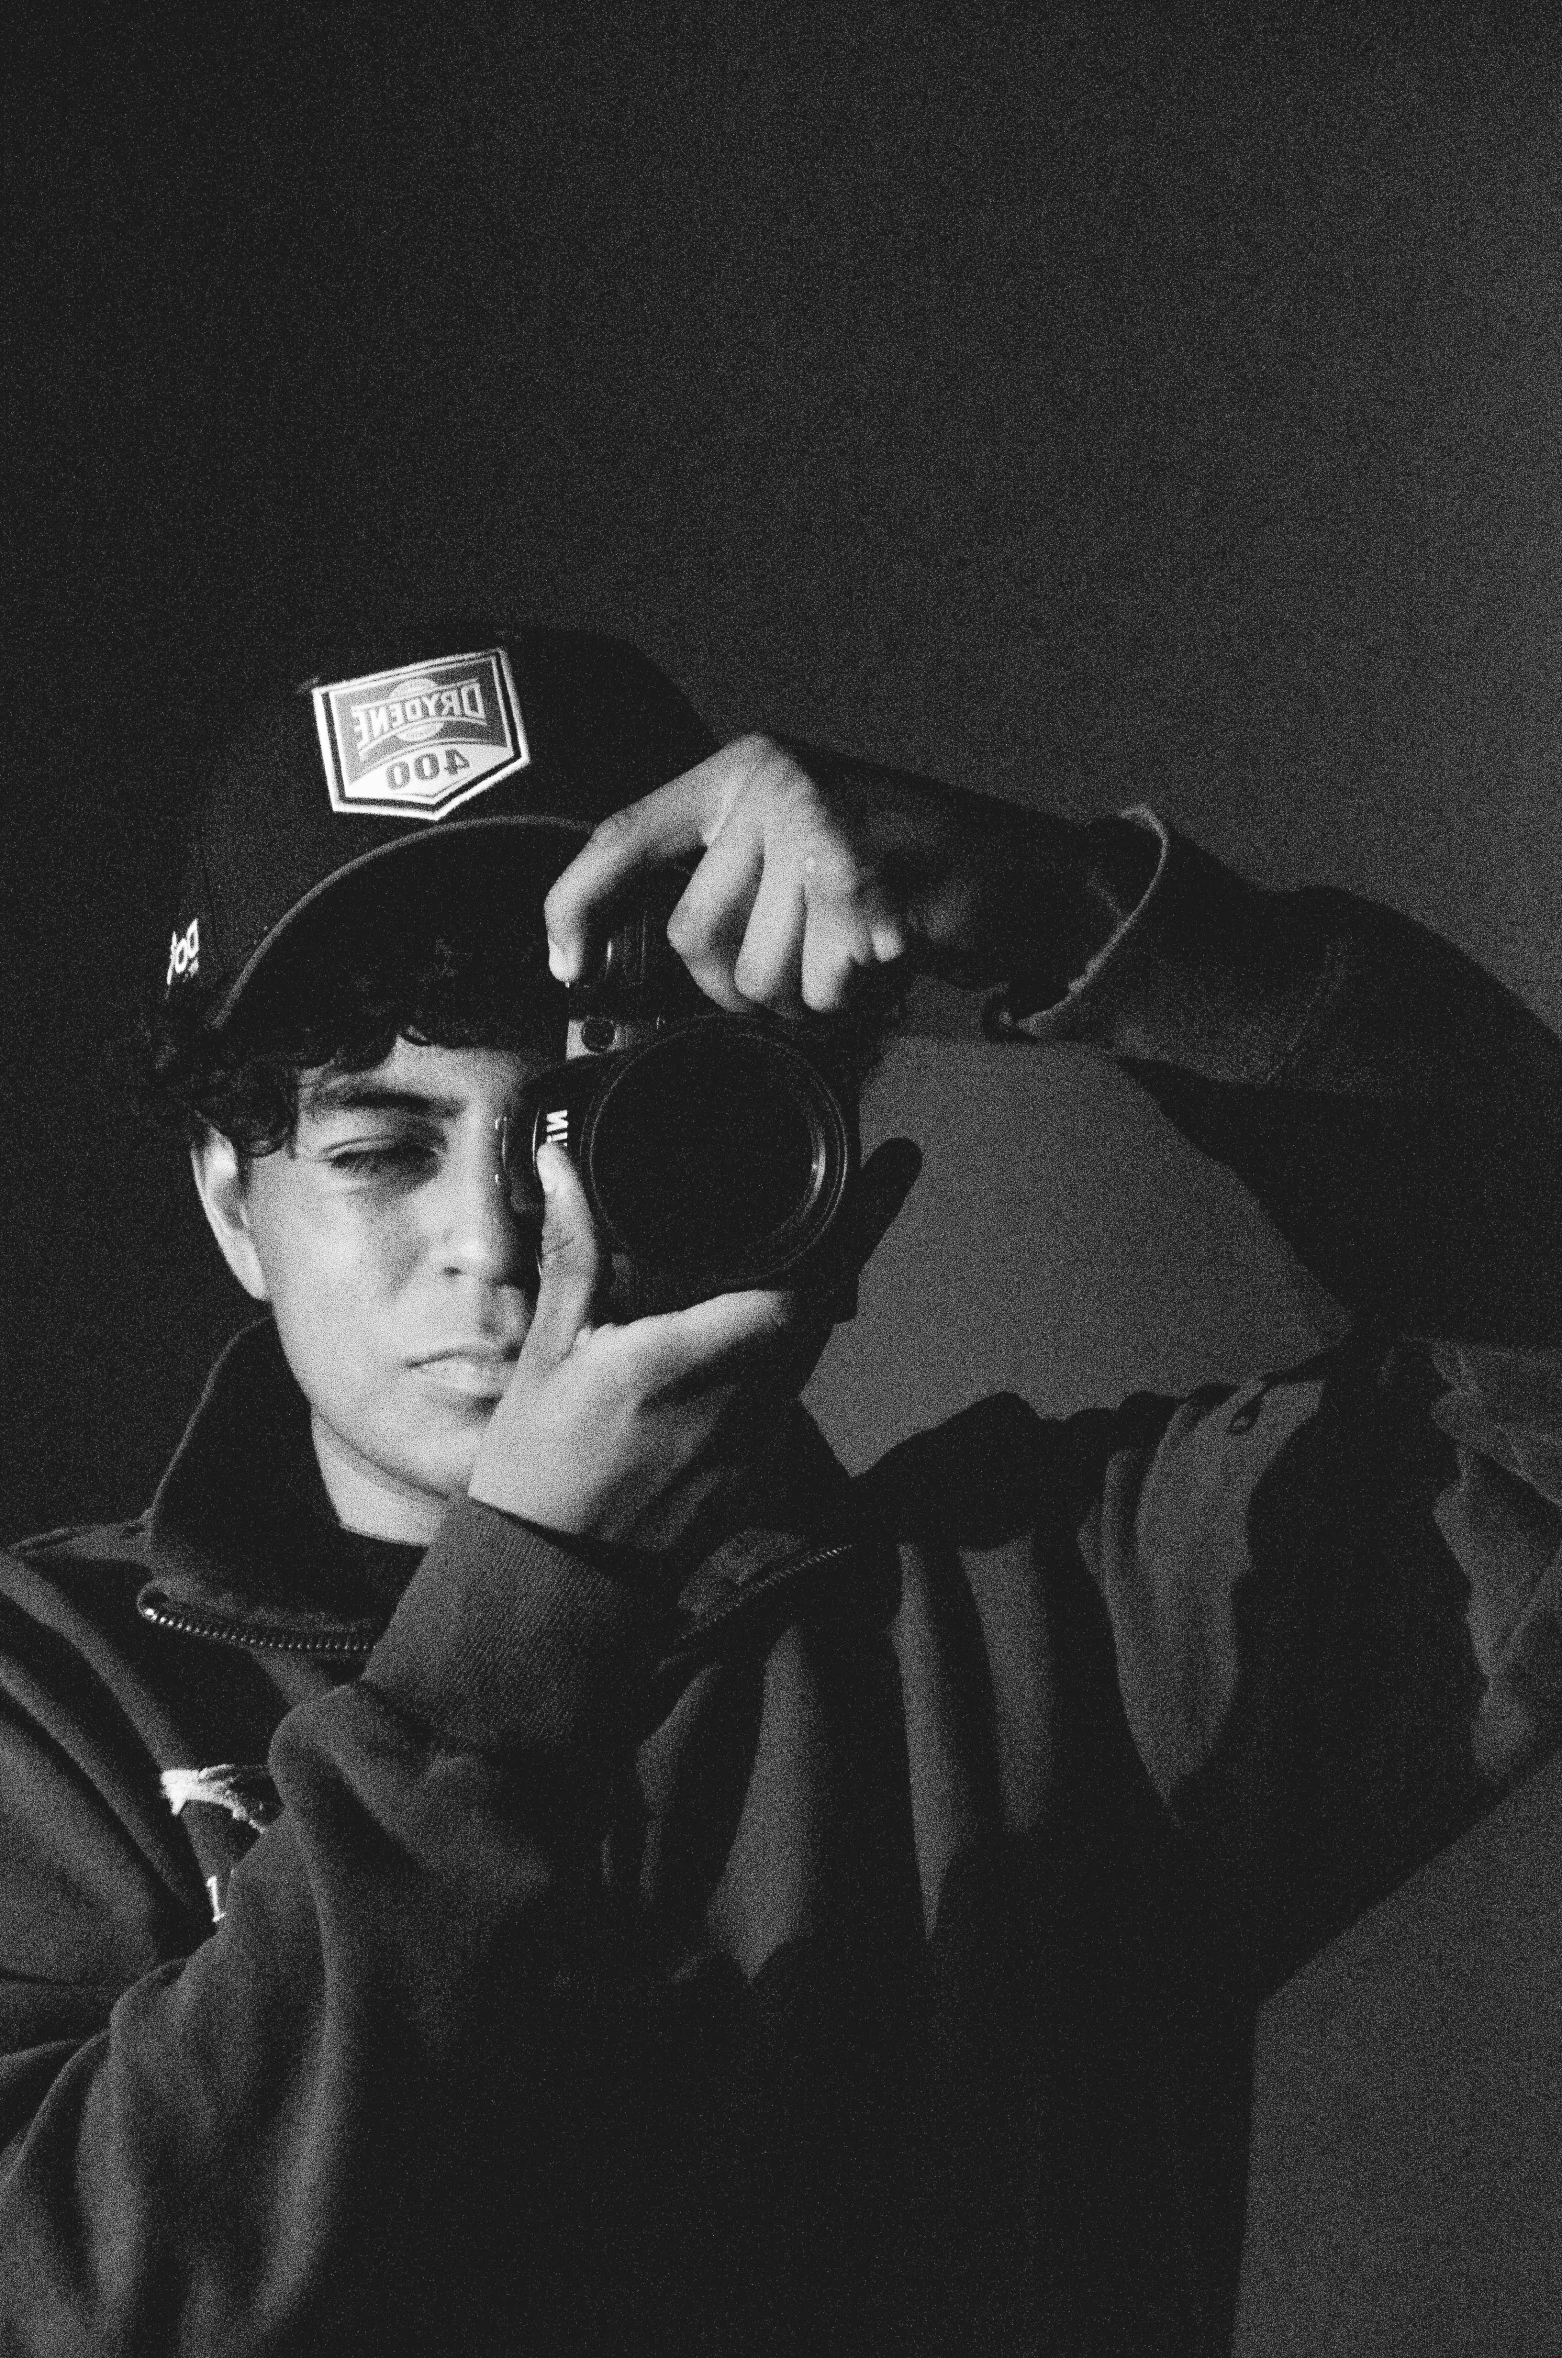 a black and white photo of a man holding a camera, a black and white photo, inspired by Ion Andreescu, wearing a backwards baseball cap, young prince, highly reflective, ariel perez